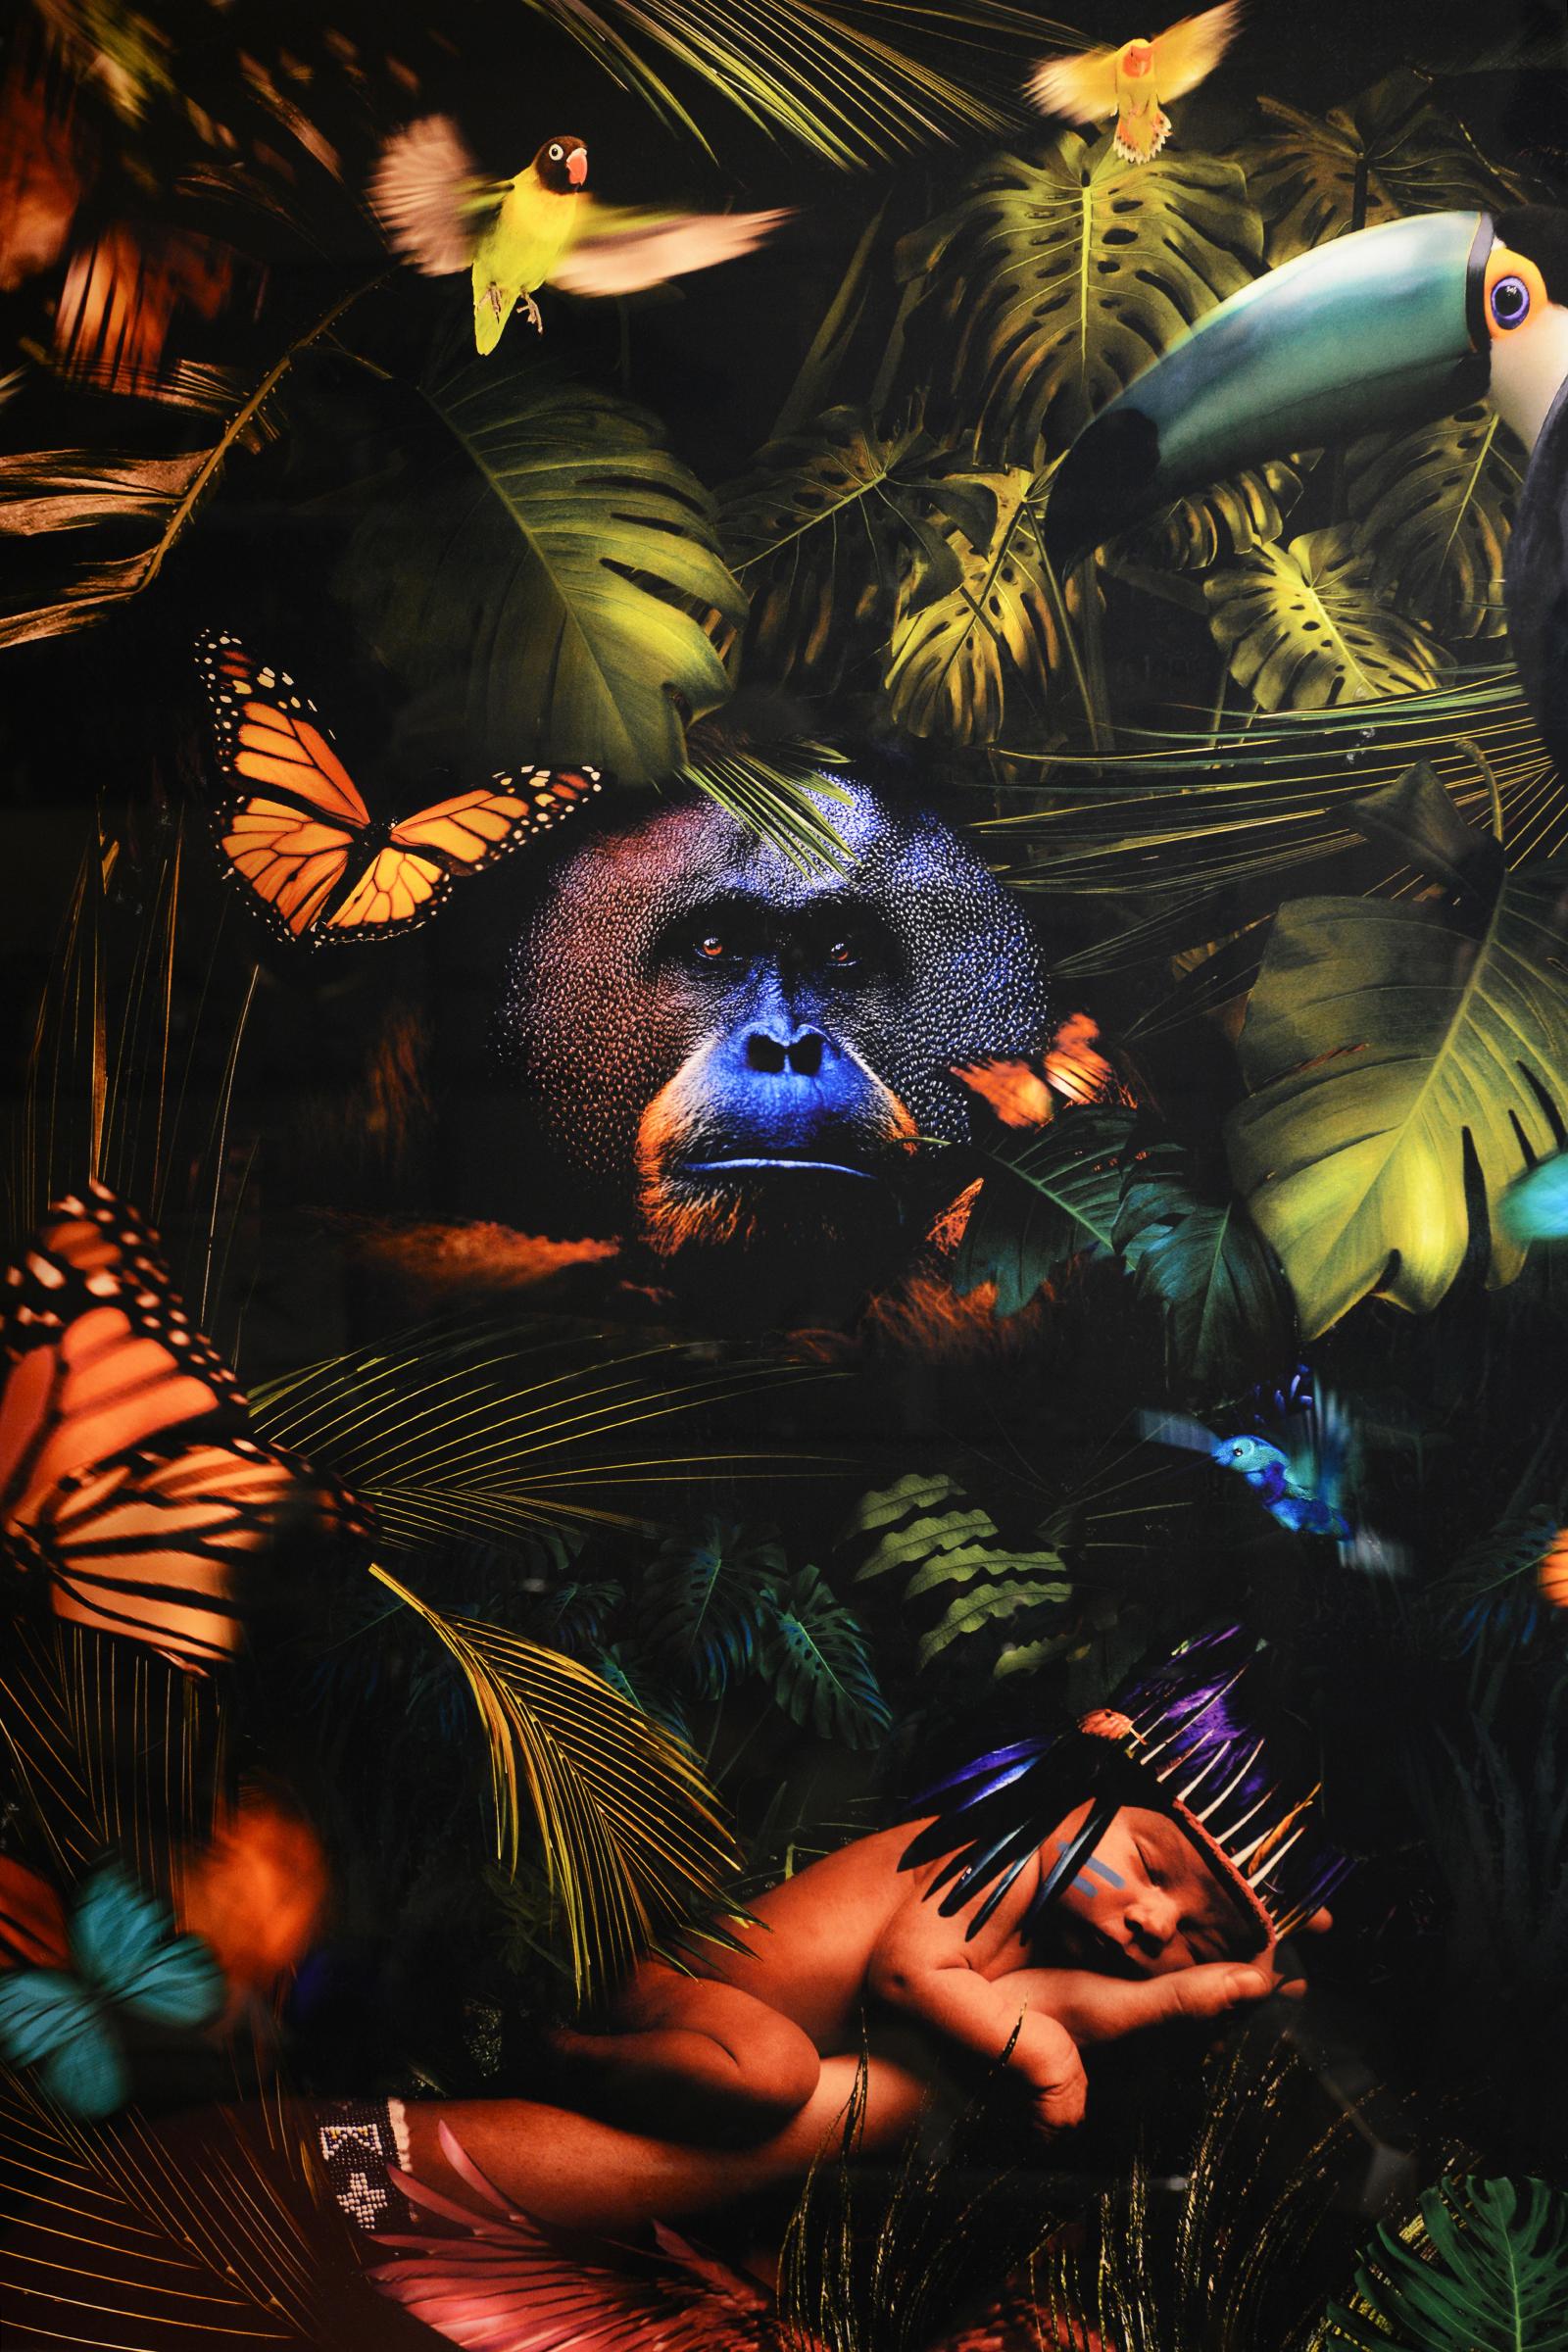 Wall Decoration Jungle Birth Plexiglass photo.
With aluminium frame included at the back 
with hanging system.